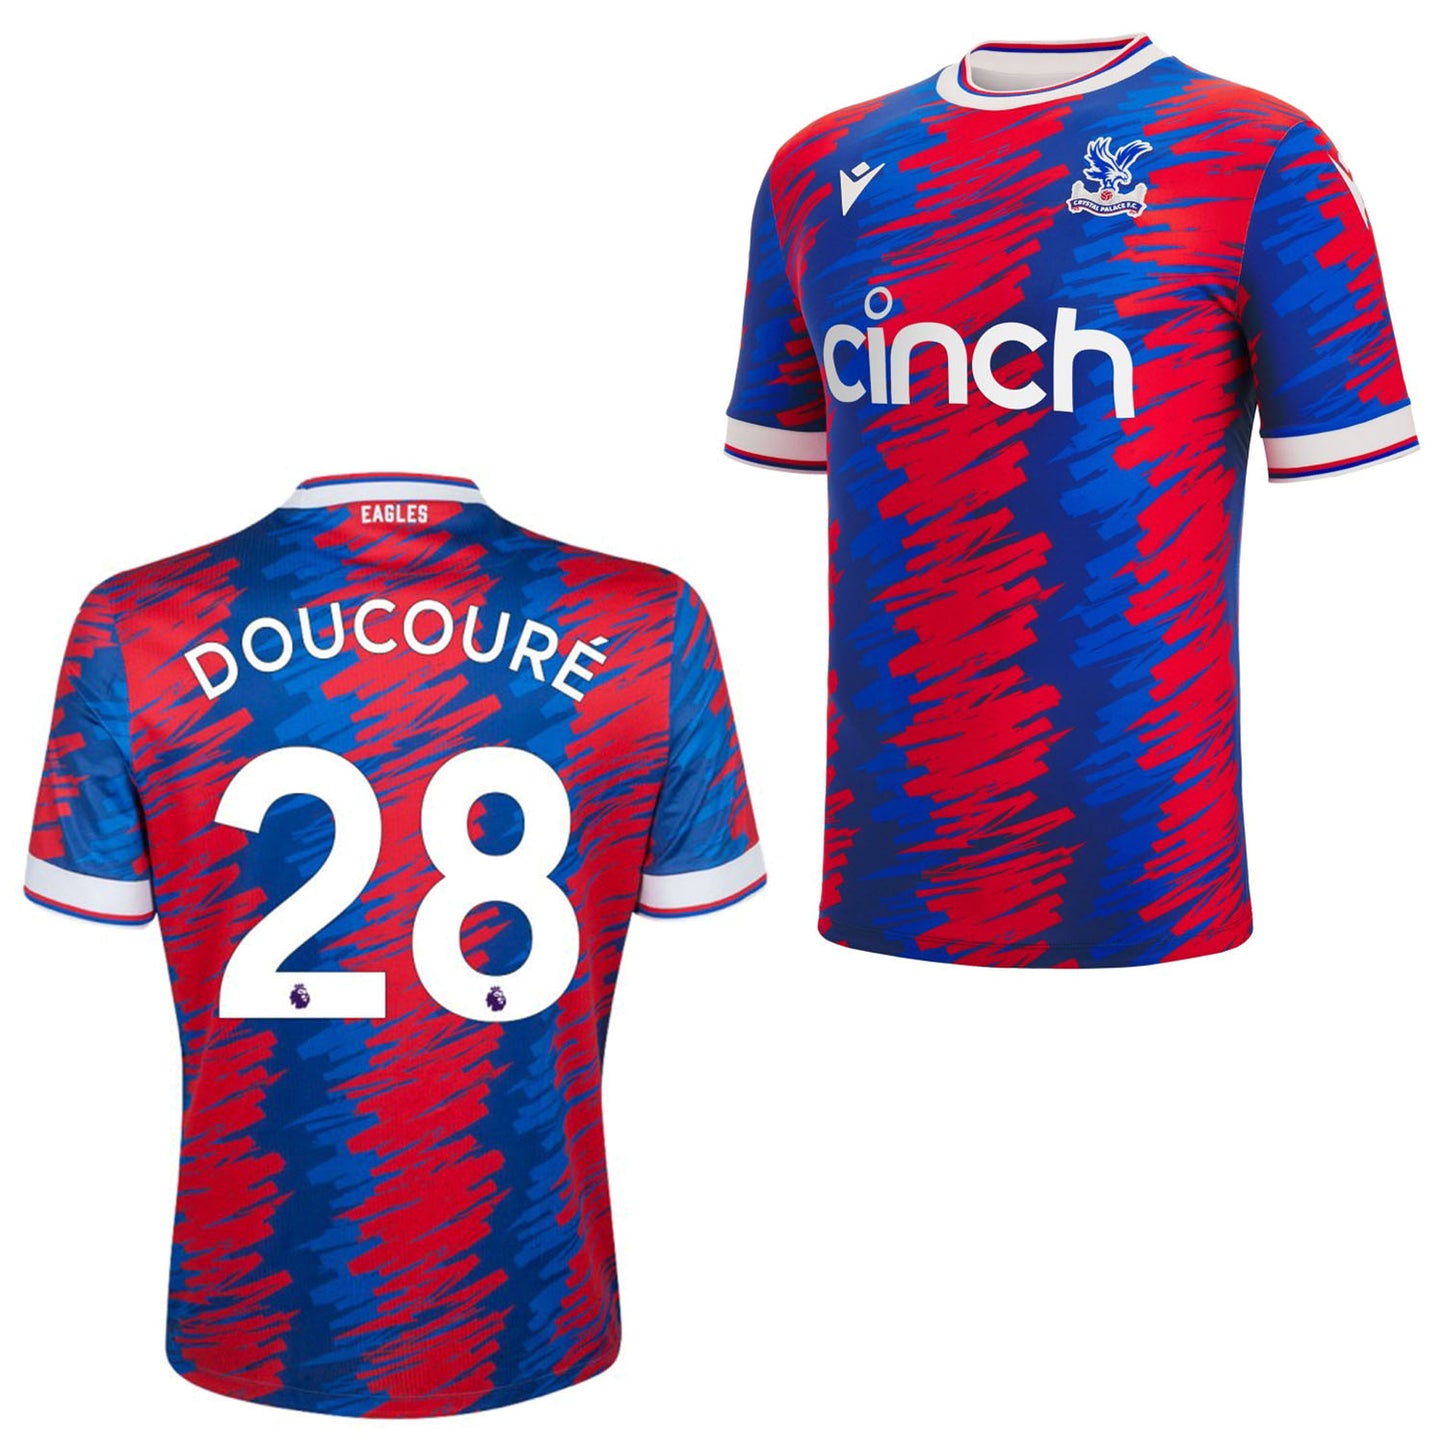 Cheick Doucoure Crystal Palace 28 Jersey